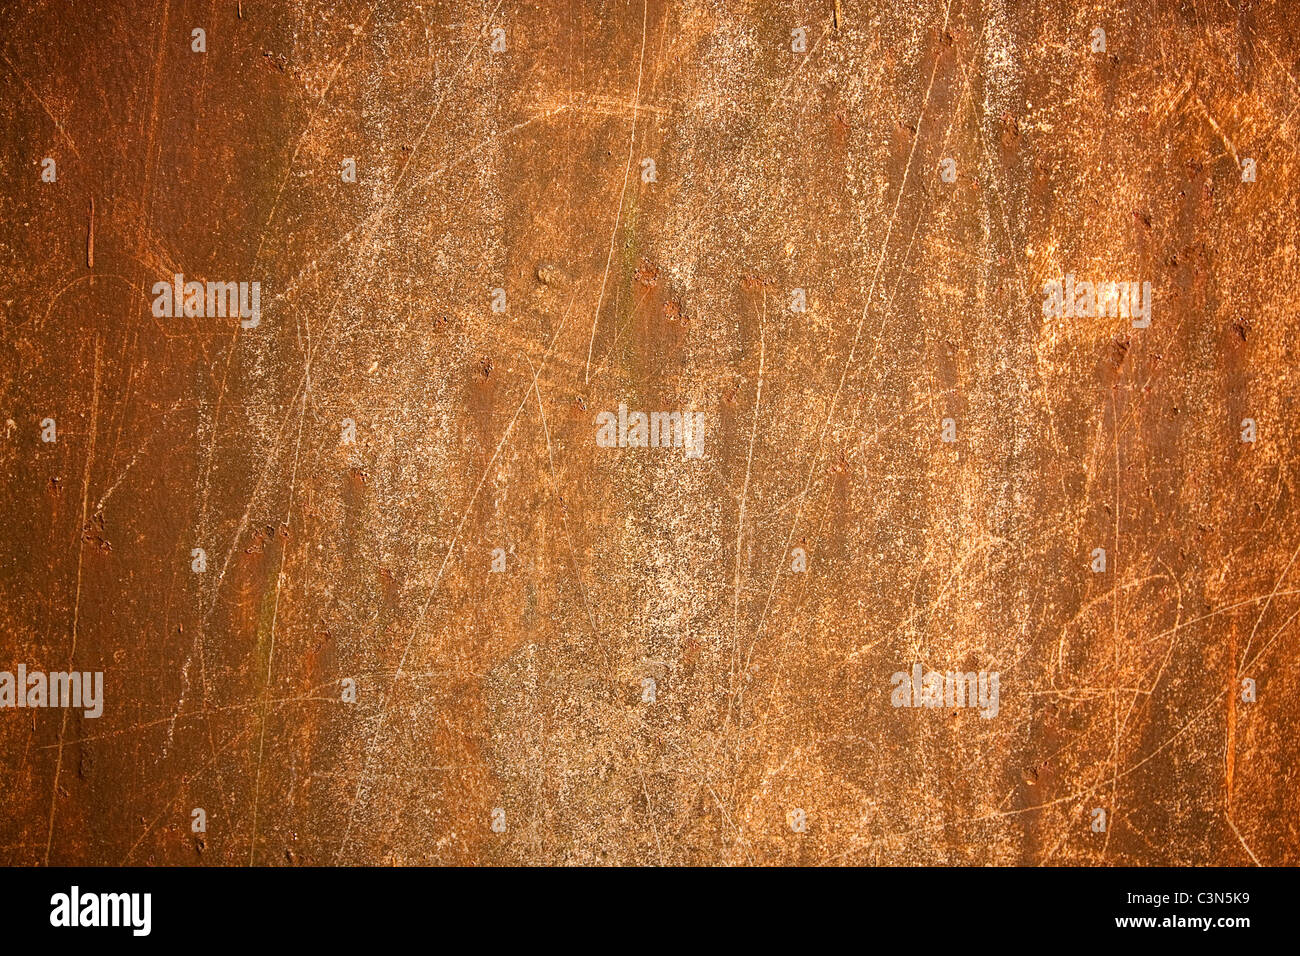 Photography shows a rusty metal background with scrachted surface. Stock Photo